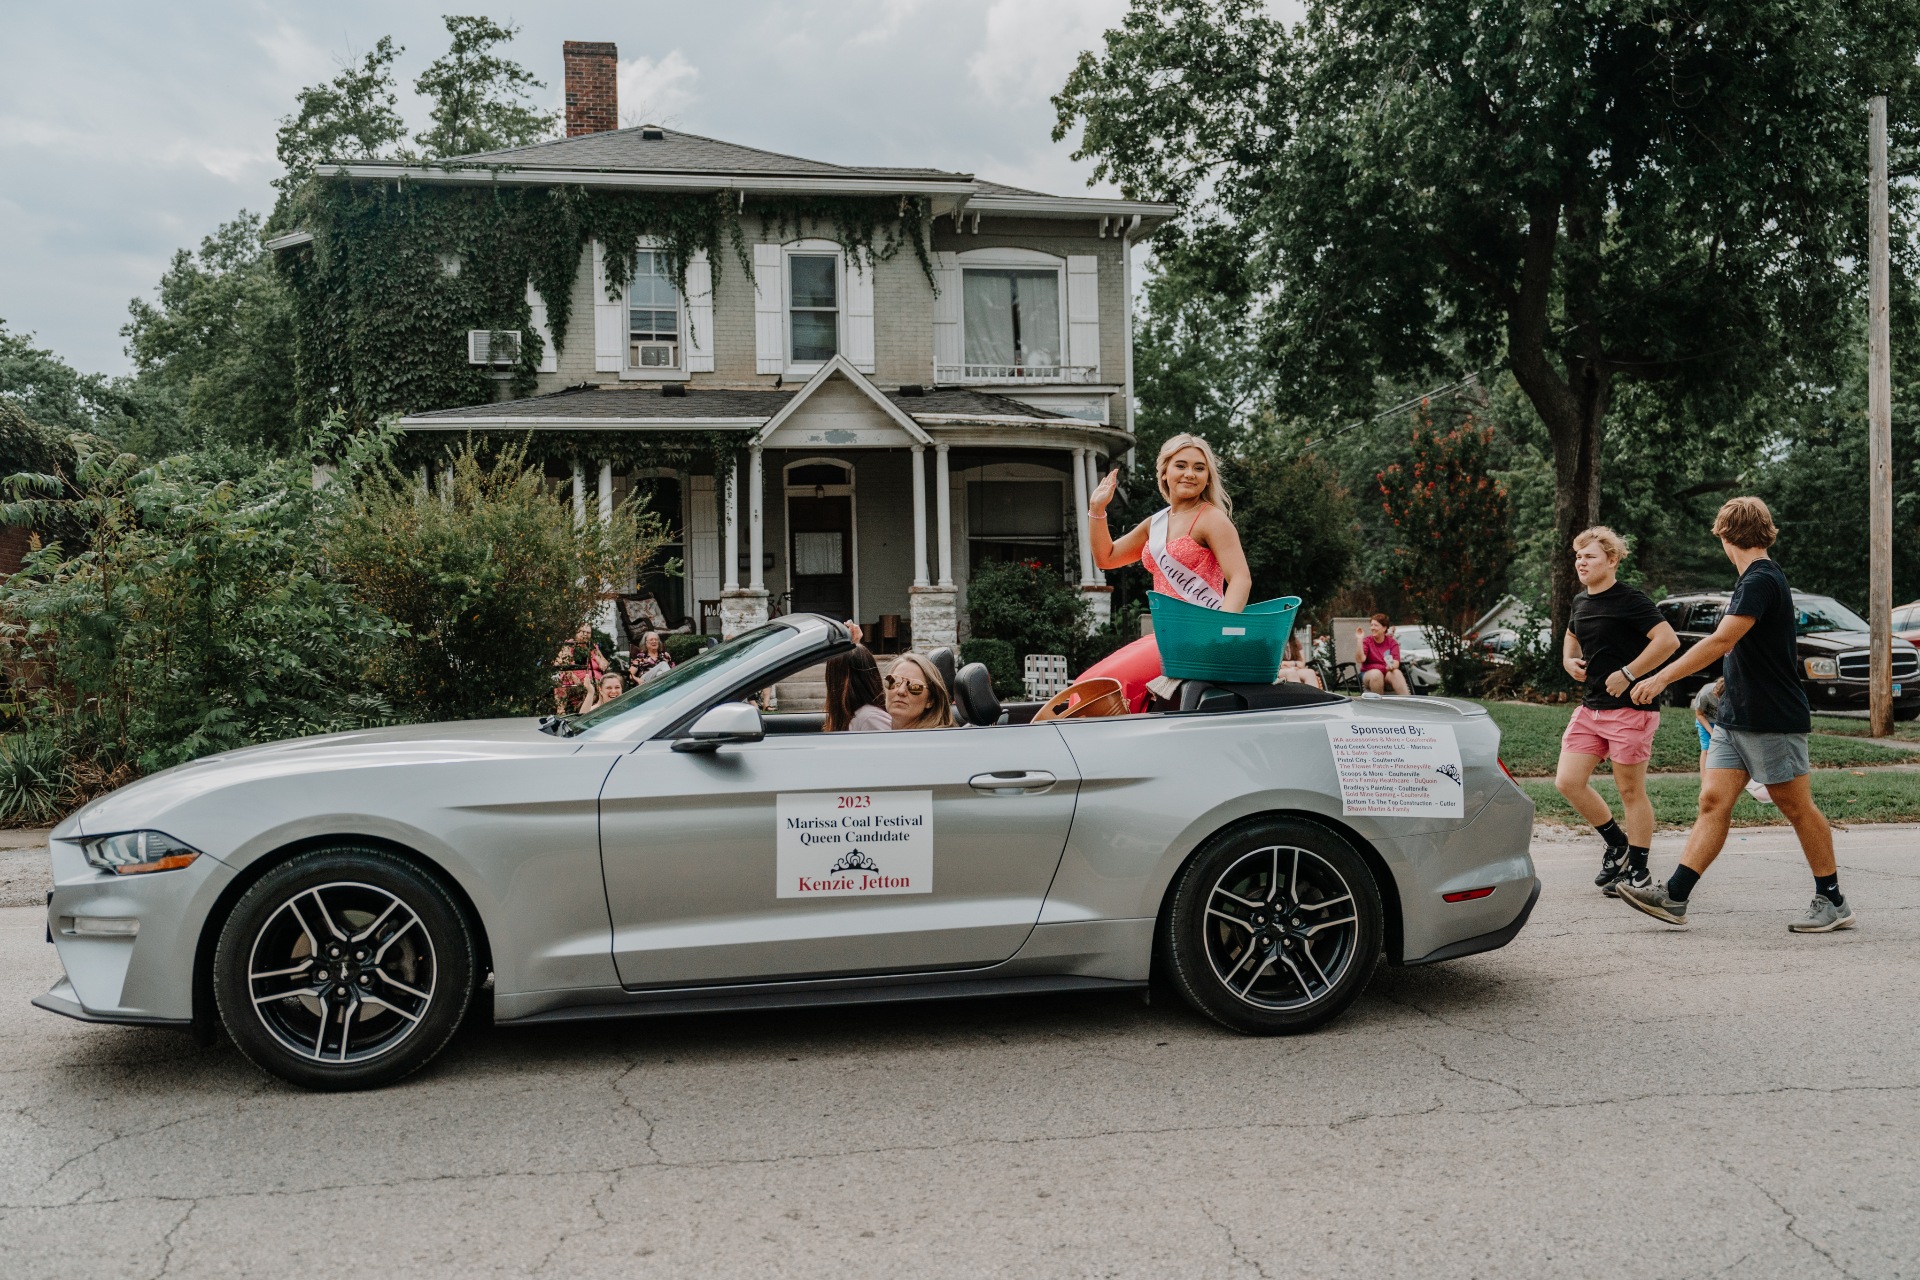 A young woman in a pink dress rides in the back of a grey convertible